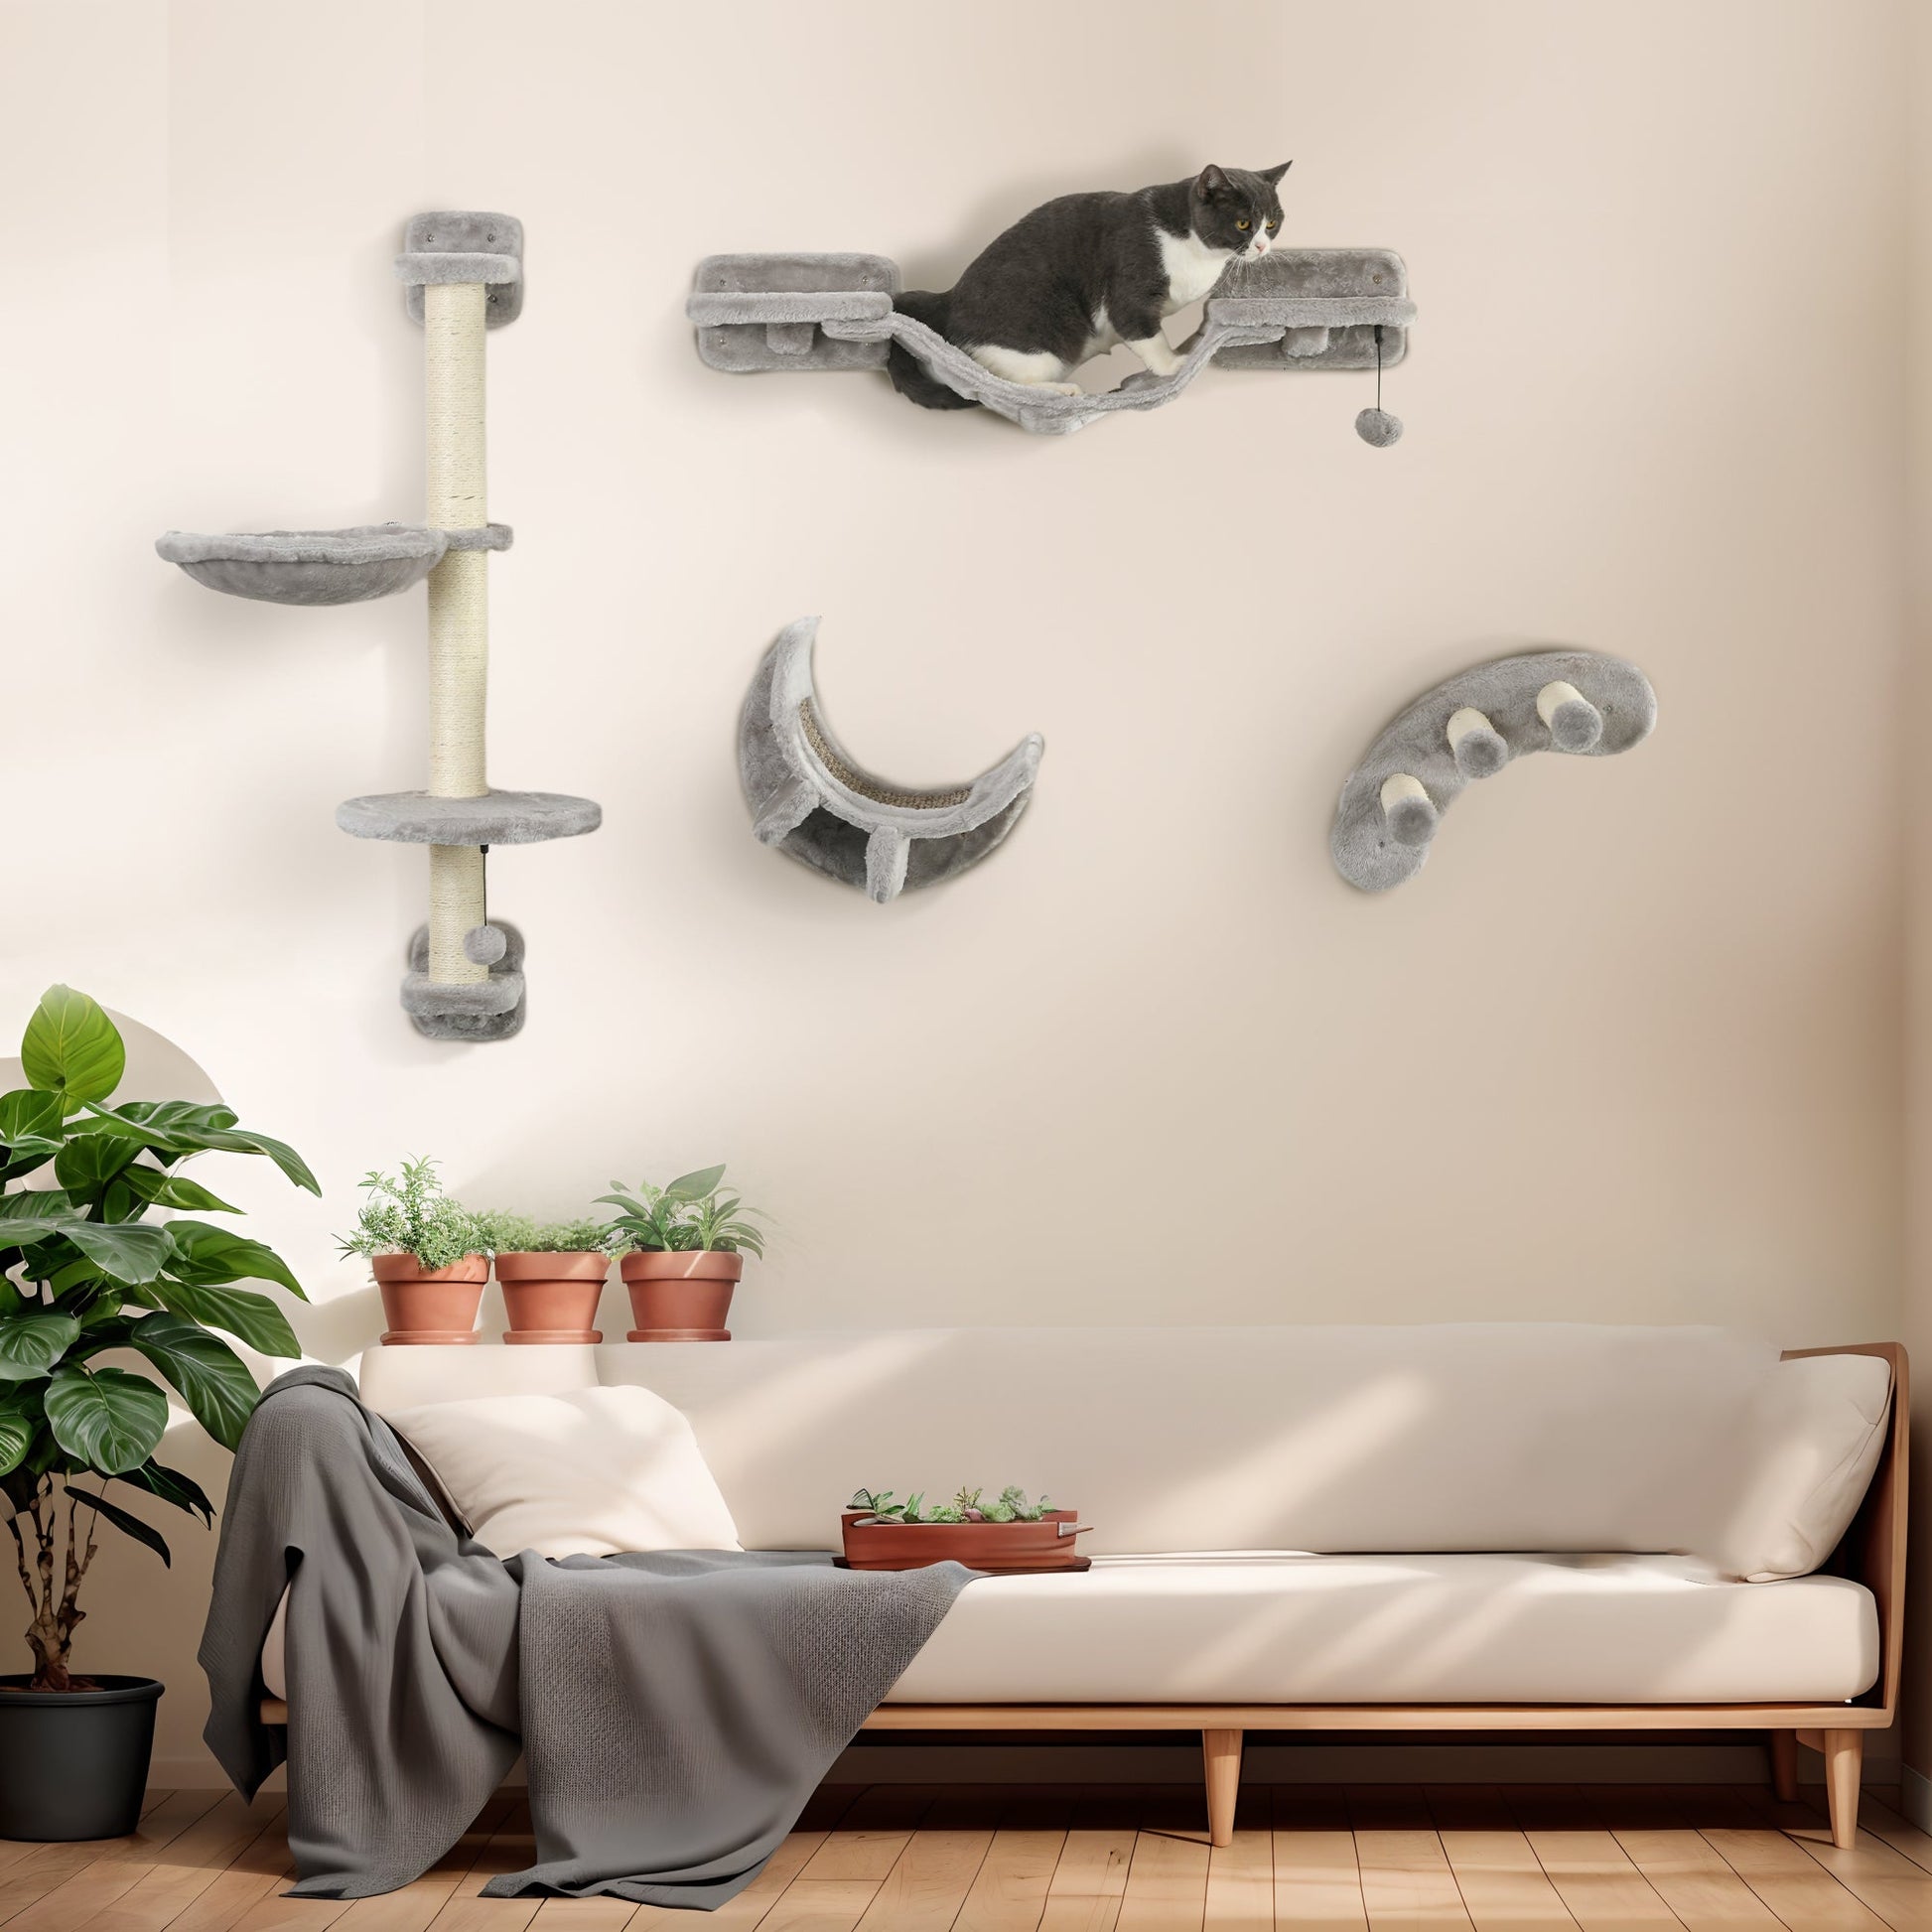 Cat Wall Shelf with Scratching Post, Jumping Platform with Soft Ladder, Cat Wall Shelves for Relaxing, Sleeping, Climbing, Cat Wall With Soft Hammock and Play Balls, Grey at Gallery Canada